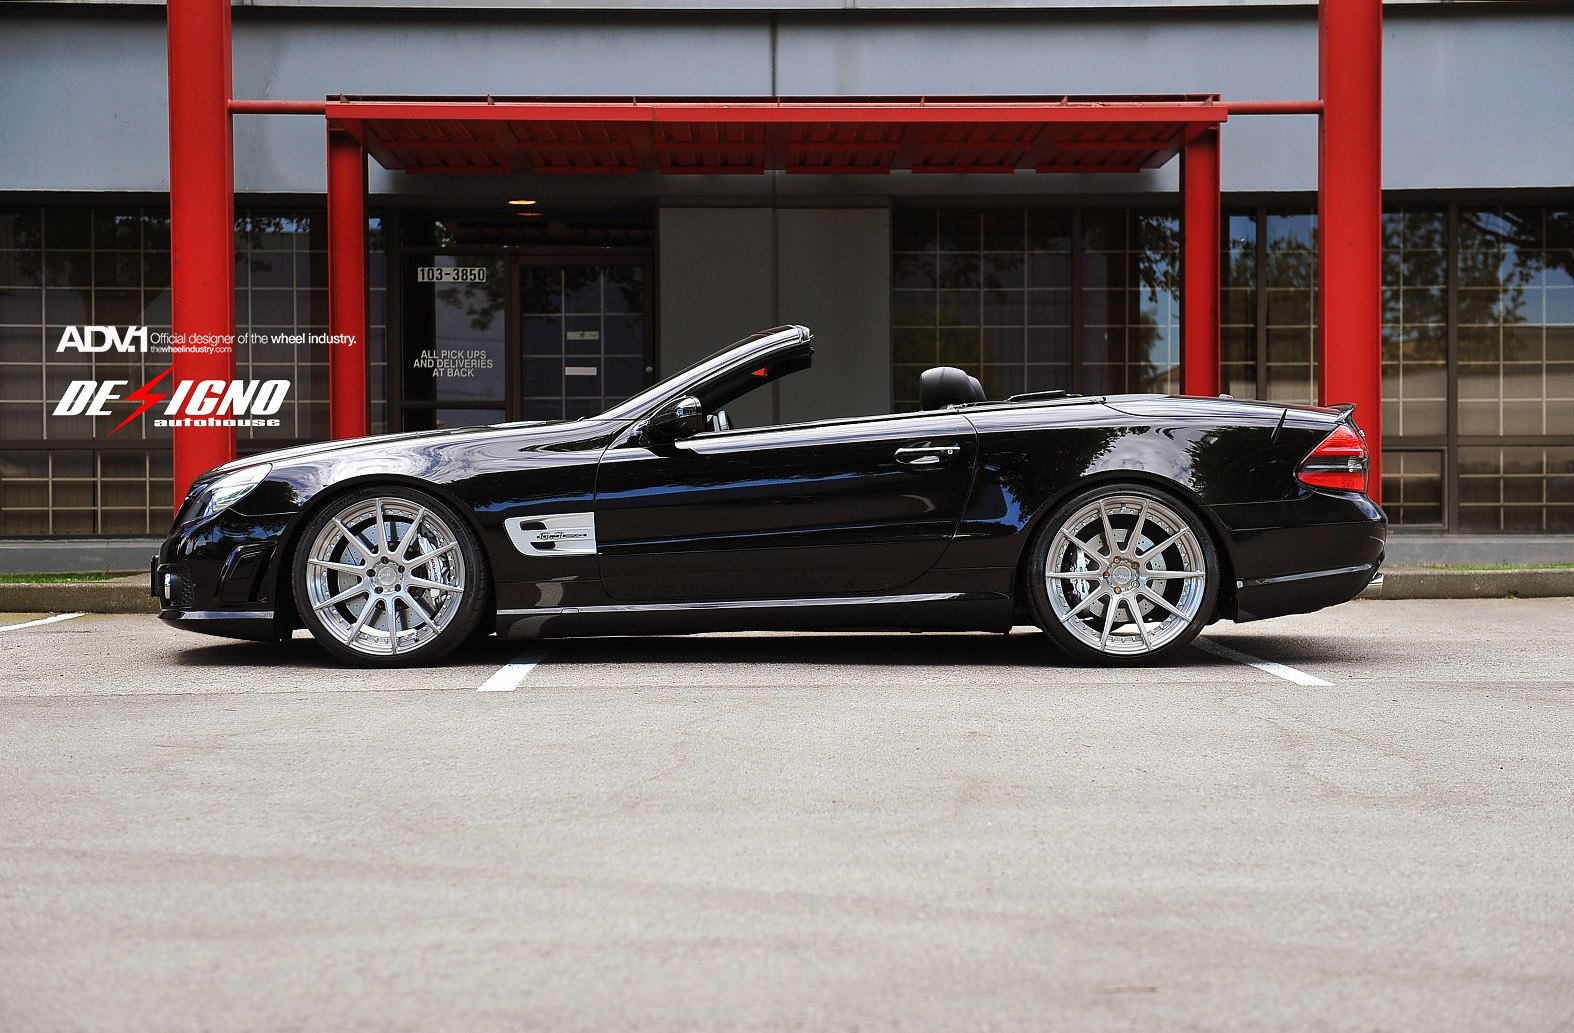 Aftermarket Side Skirts on Black Convertible Mercedes SL Class - Photo by ADV.1